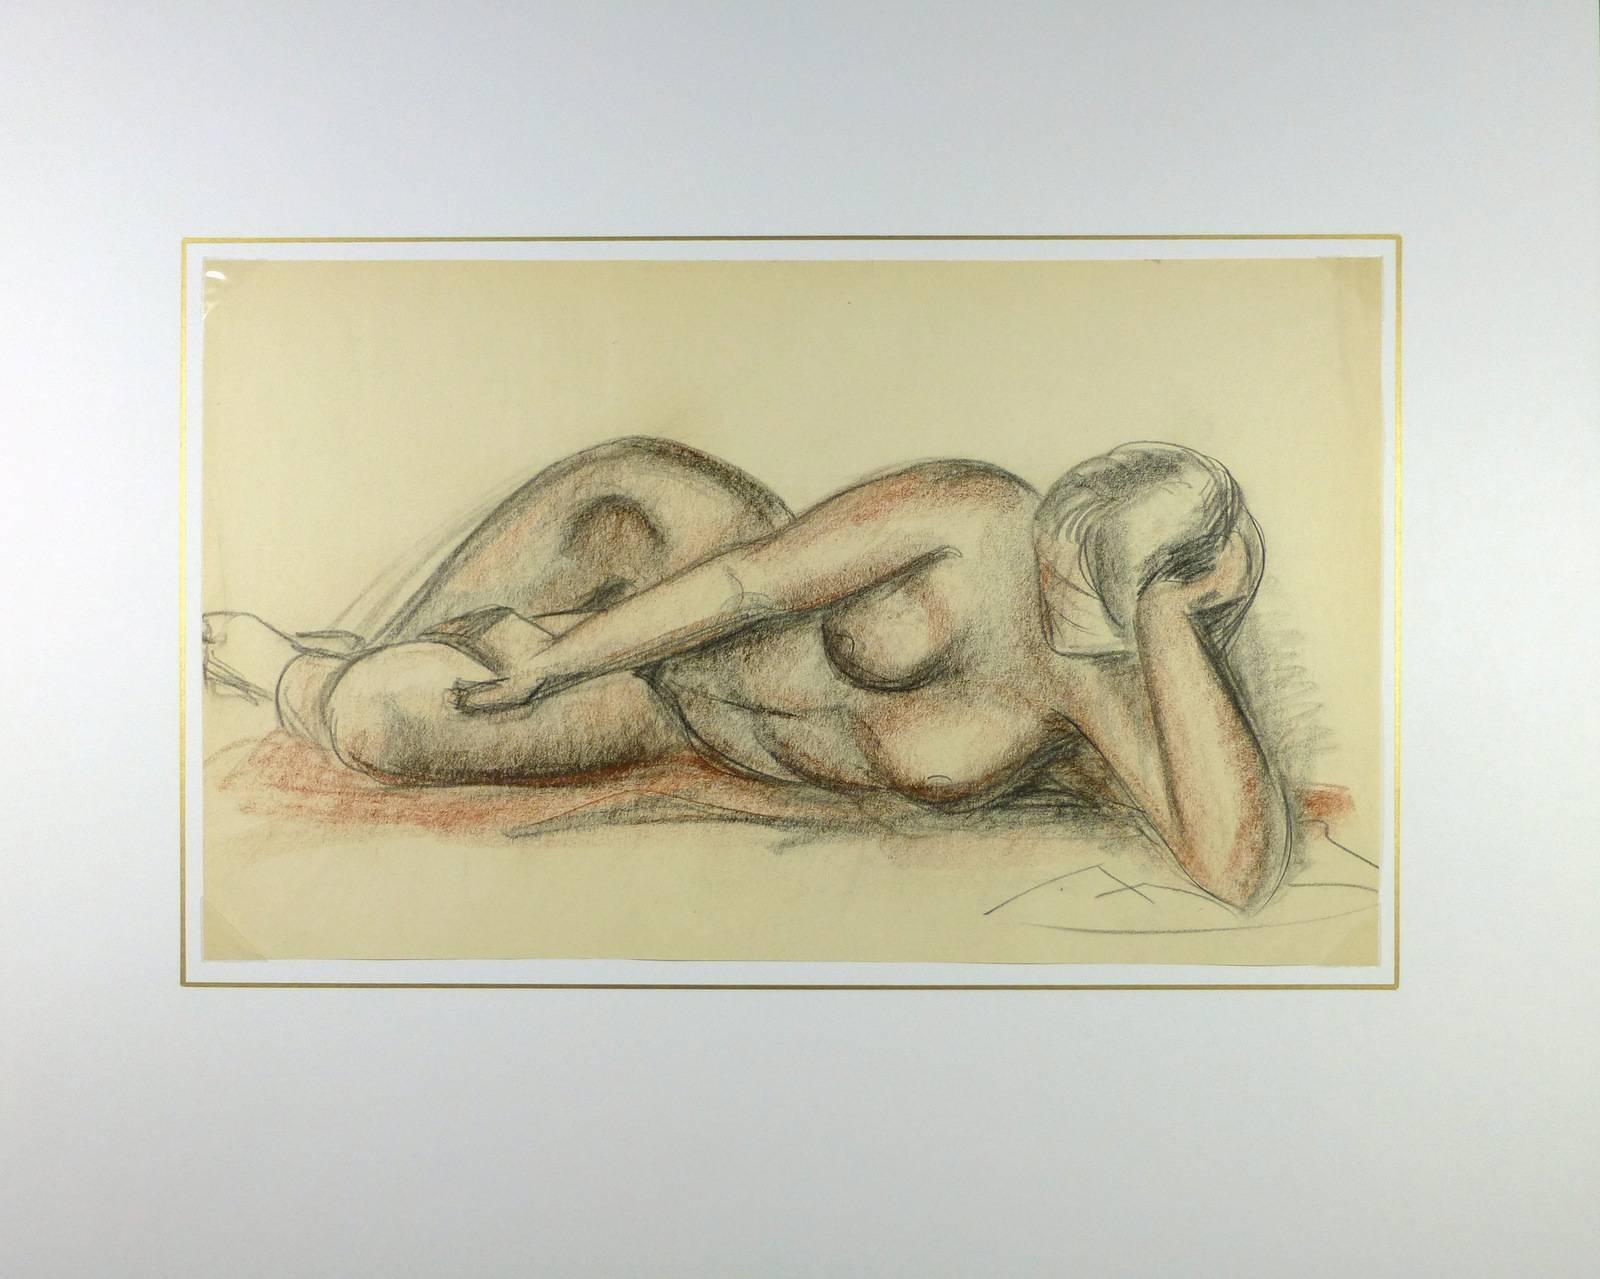 French nude female laying on side in charcoal by French artist A. Delamaire, circa 1930. 

Original artwork on paper displayed on a white mat with a gold border. Mat fits a standard-size frame.  Archival plastic sleeve and Certificate of